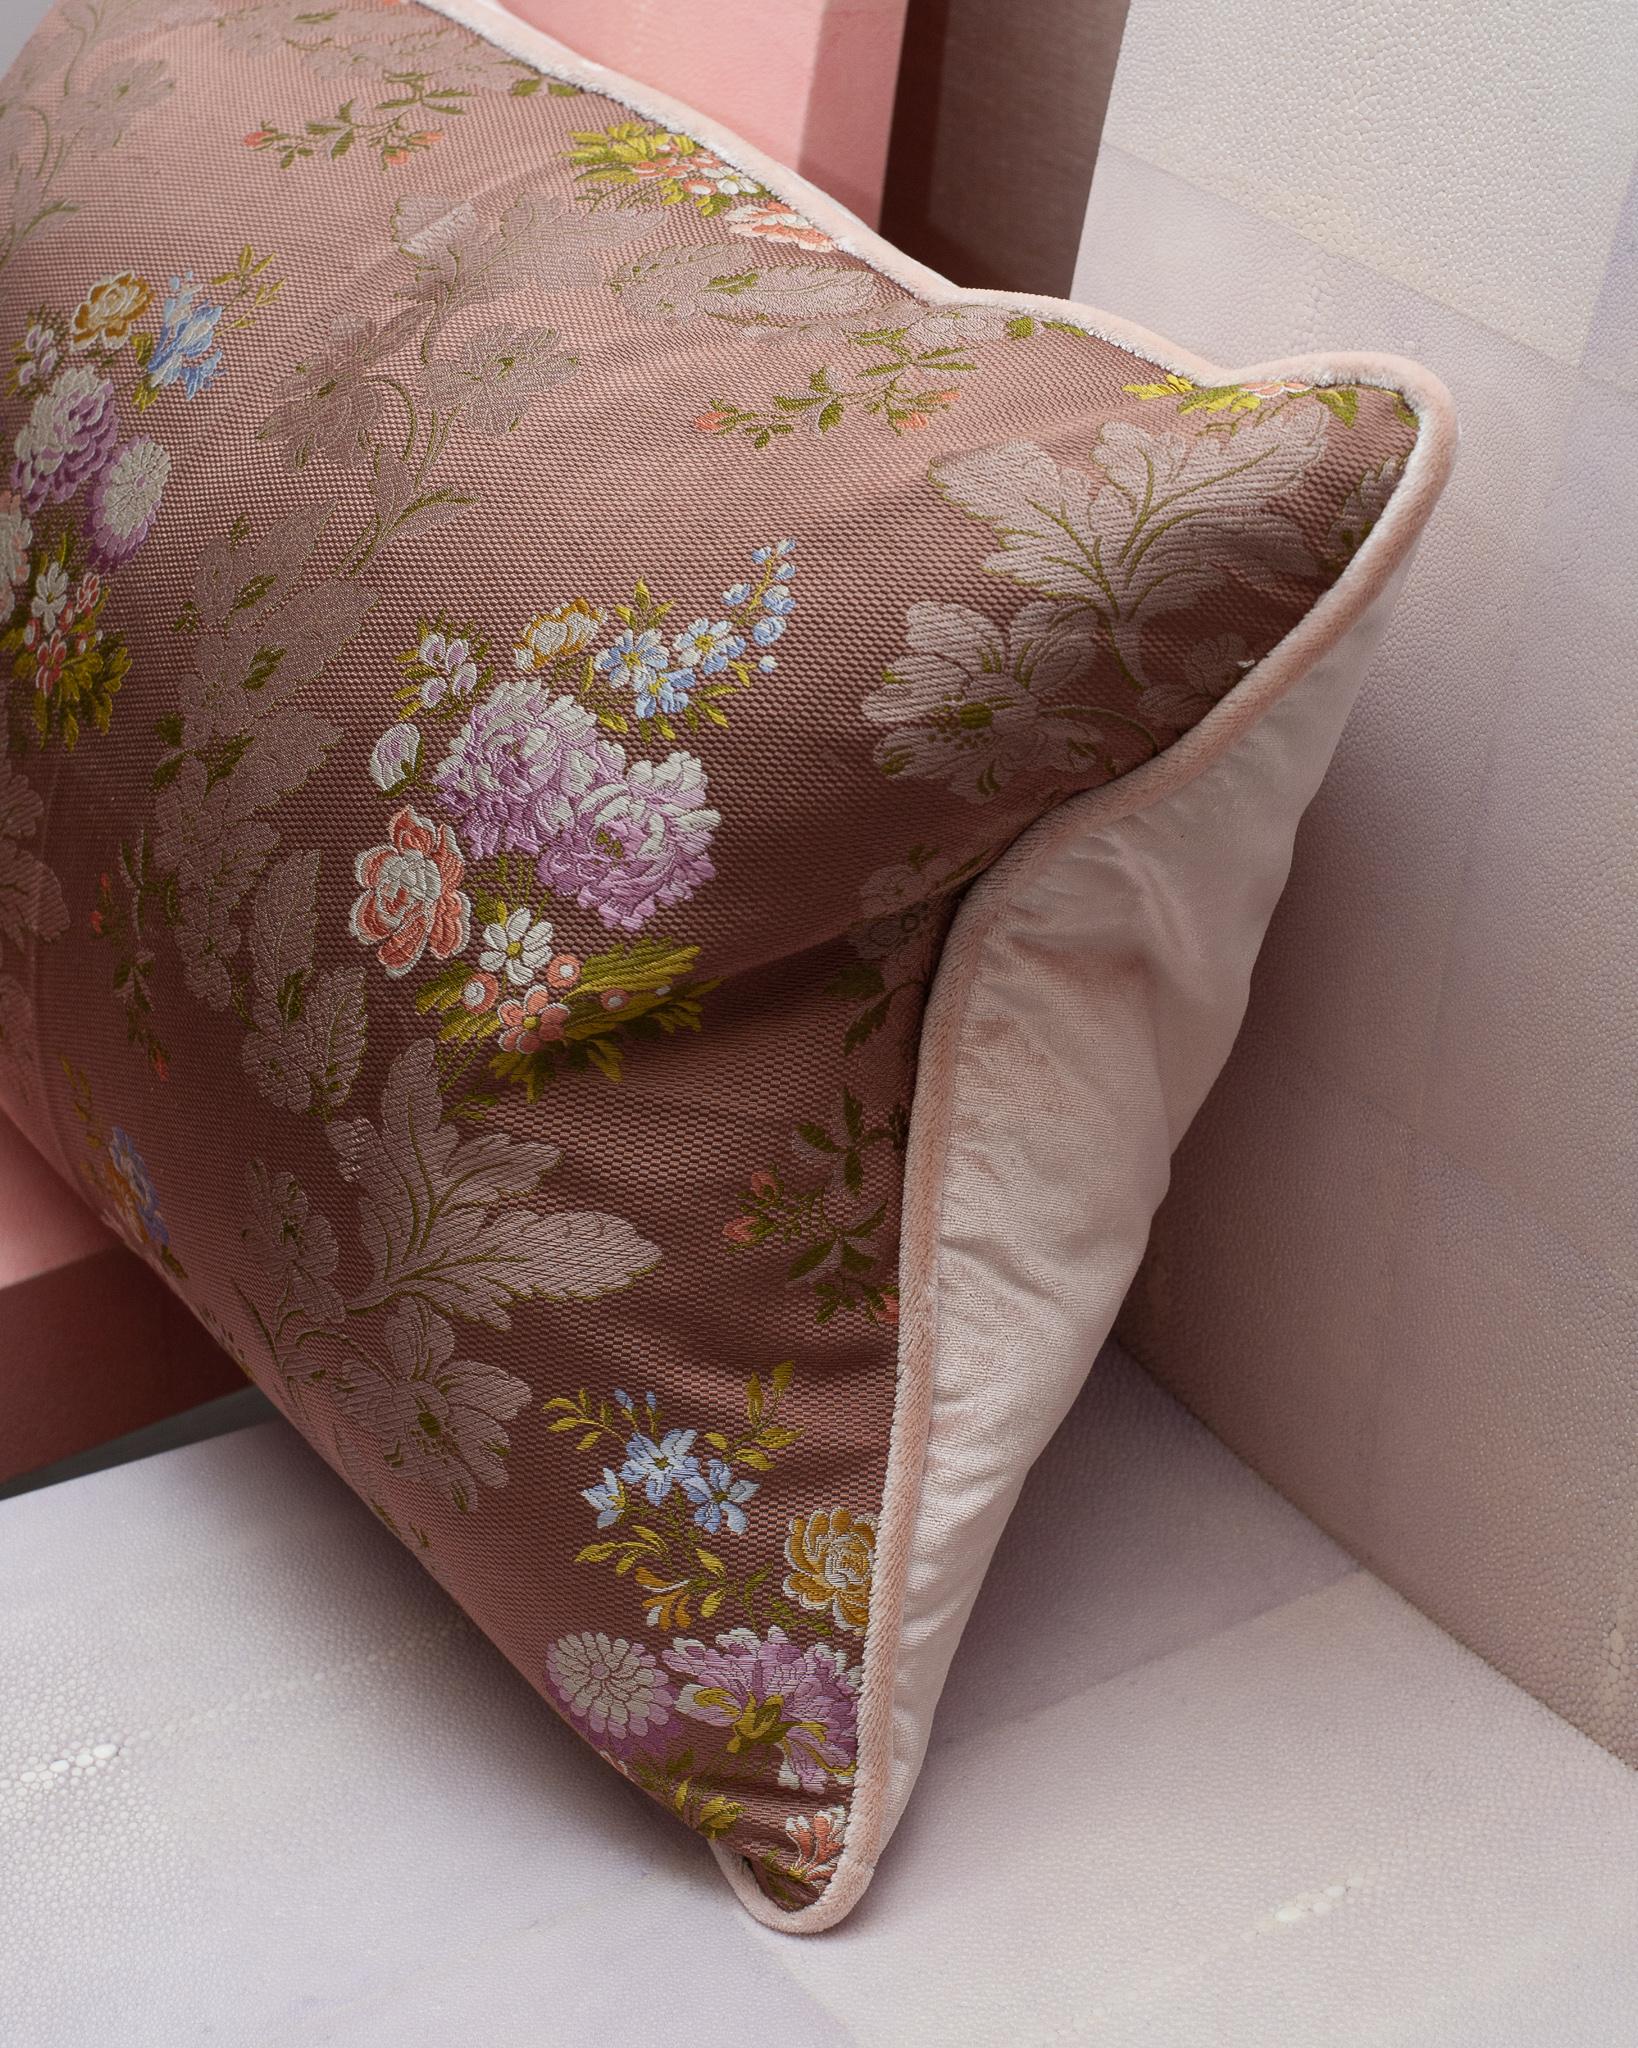 A large Studio Maison Nurita handmade pillow with silk document print embroidery, backed in a soft pink silk velvet with matching piping. Filled with goose down and feather blend.